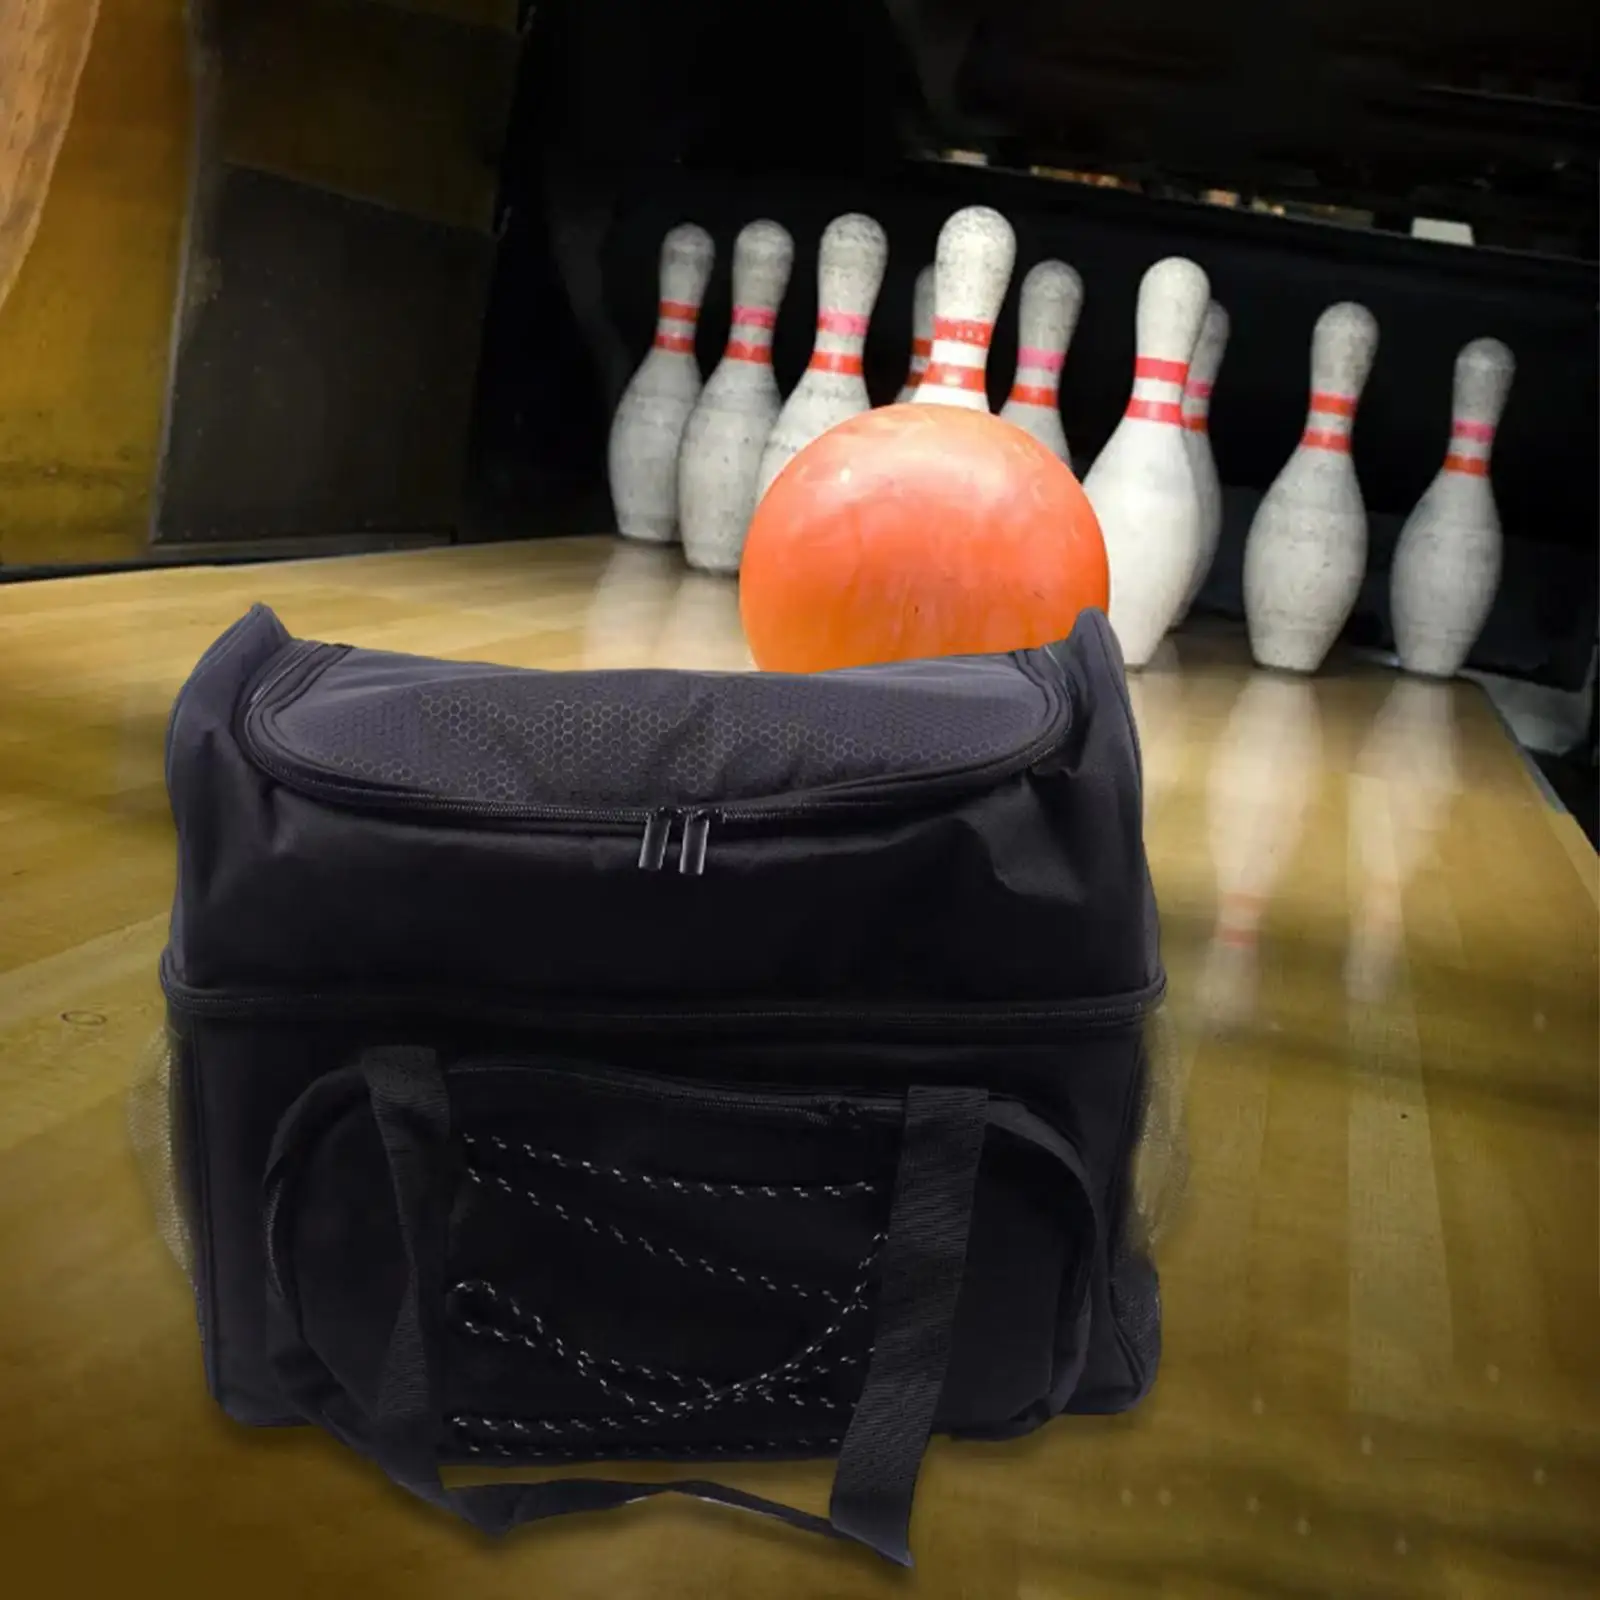 Bowling Tote Bag Portable Nylon Protective Bowling Bag for Double Balls Fits Bowling Shoes up to Mens Size 16 Bowling Accessory